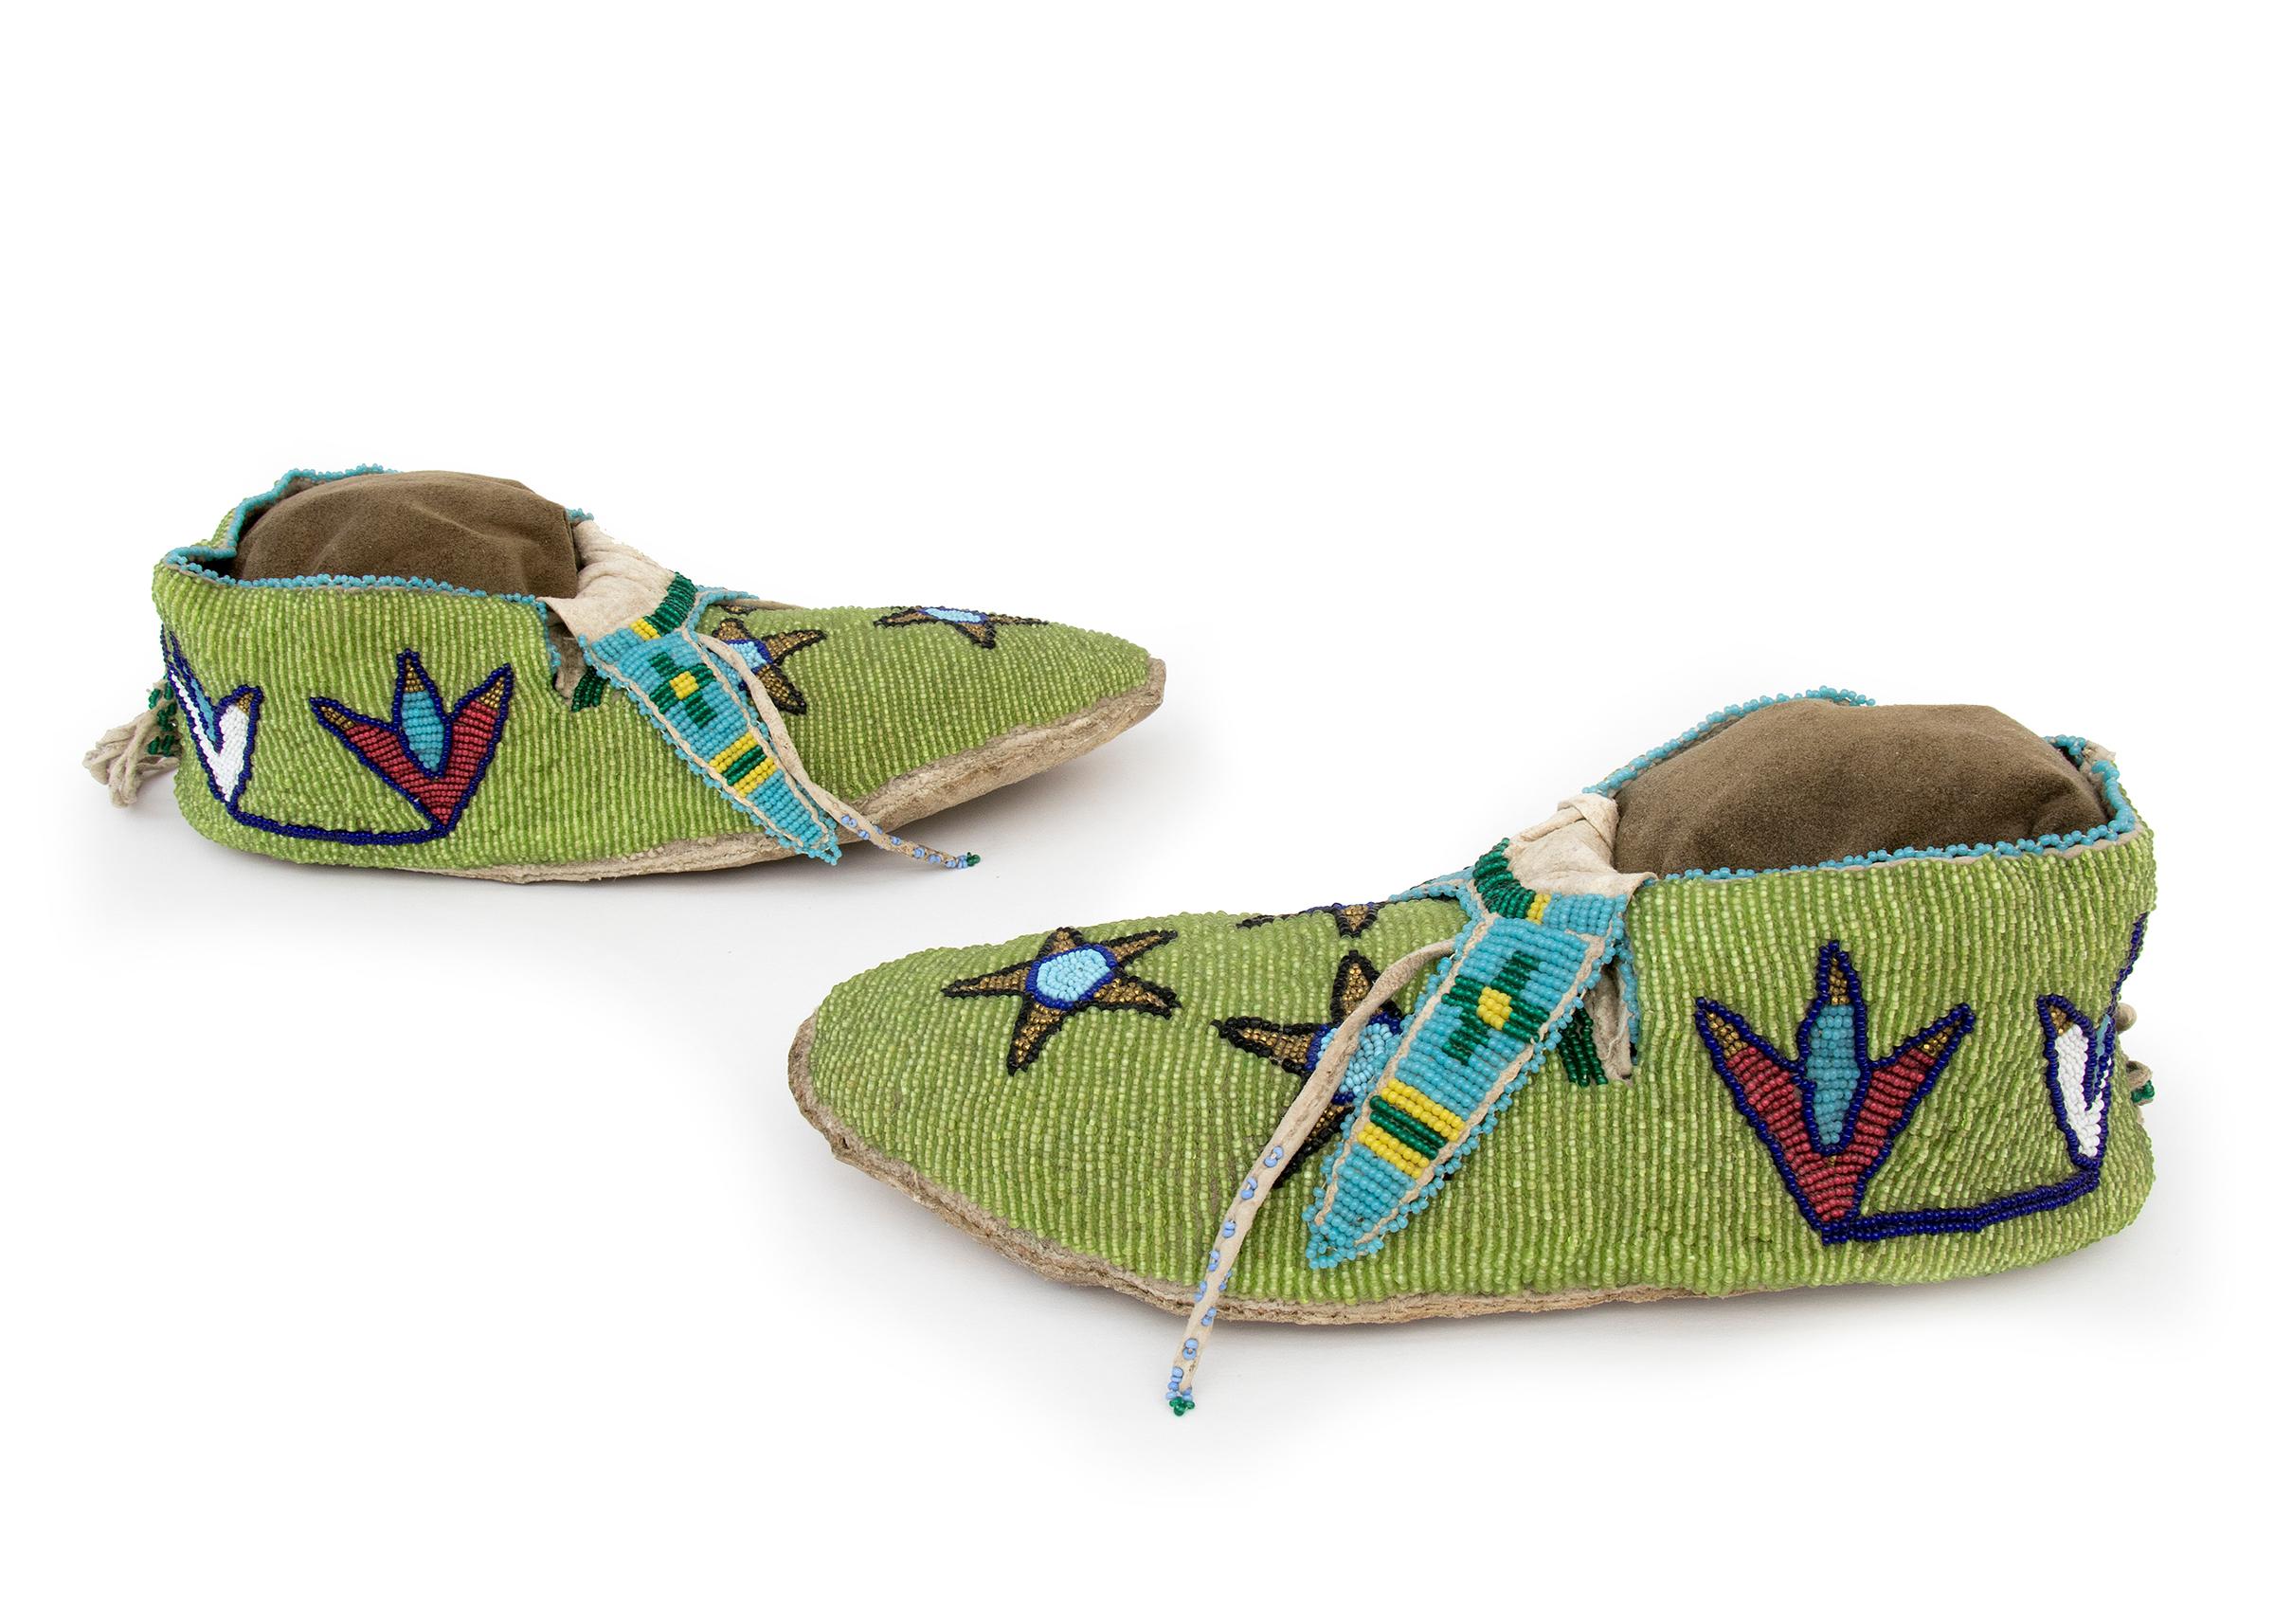 Native American Antique Beaded Moccasins, Cree, Plains Indian, circa 1890, Star & Cactus Flowers